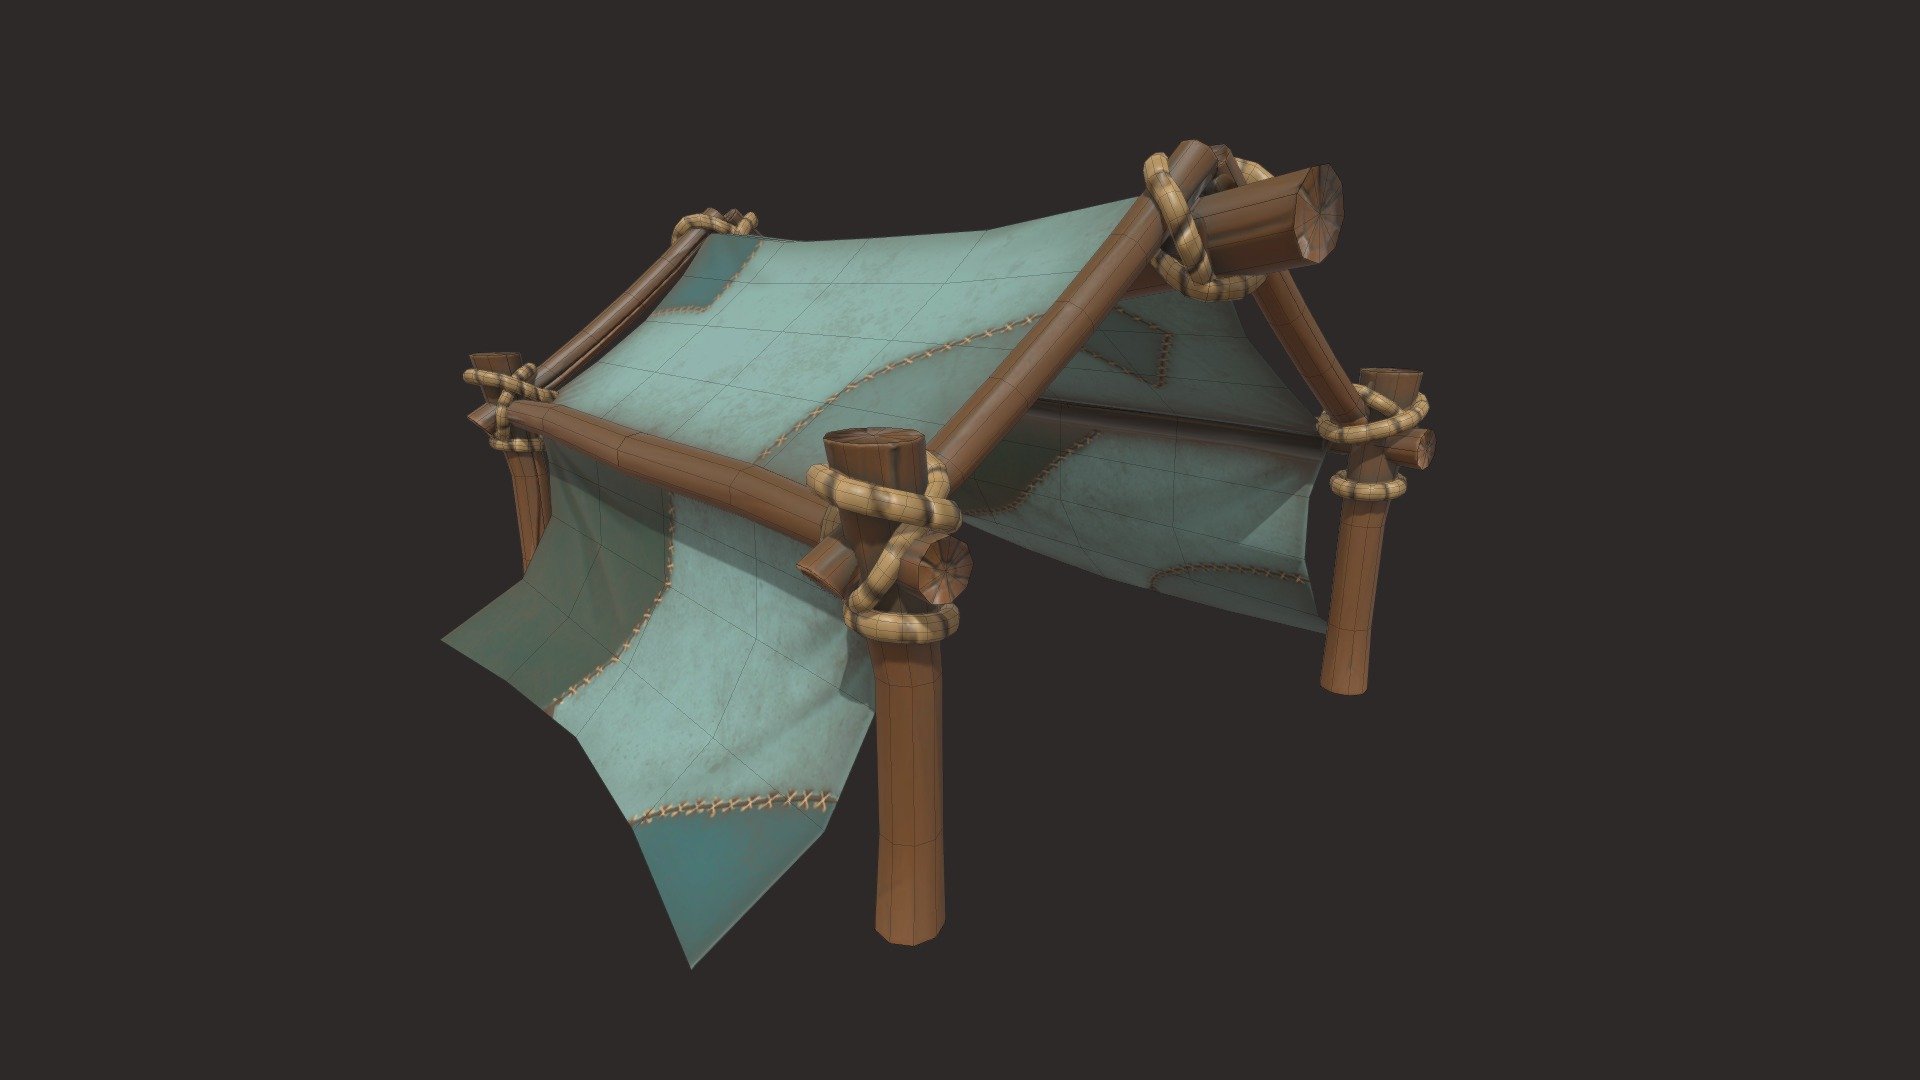 Stylized tent. Tools used:
- 3DsMax for LP and HP models;
- ZBrush for adding details (foleds, stitches, wood cracks, rope);
- Substance painter for texturing;
- Marmoset for rendering 3d model